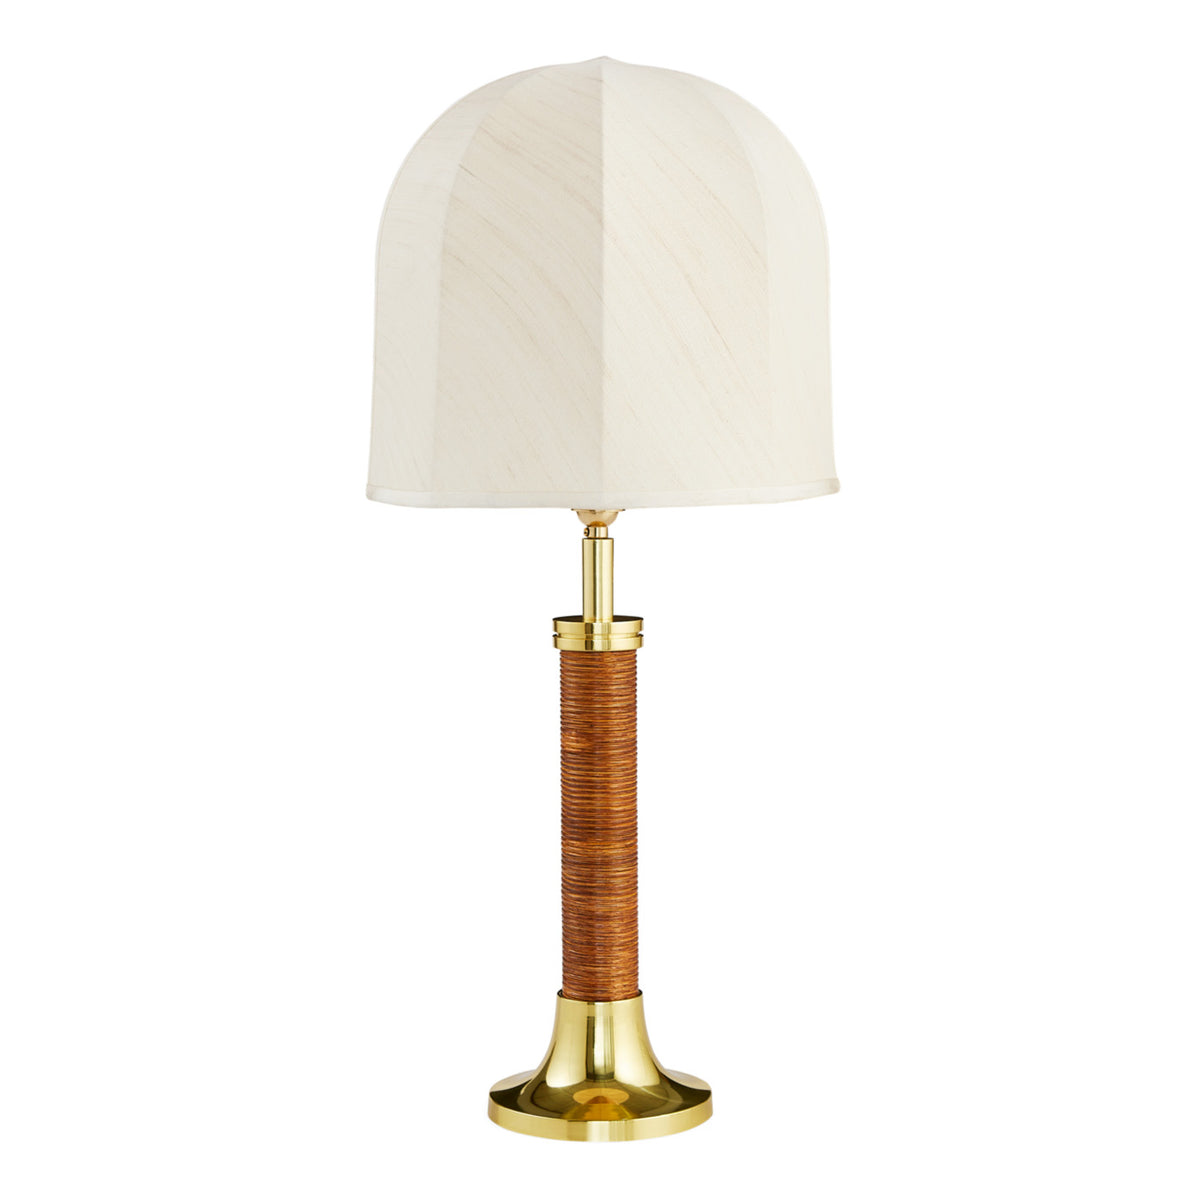 Riviera Dome Table Lamp by Jonathan Adler